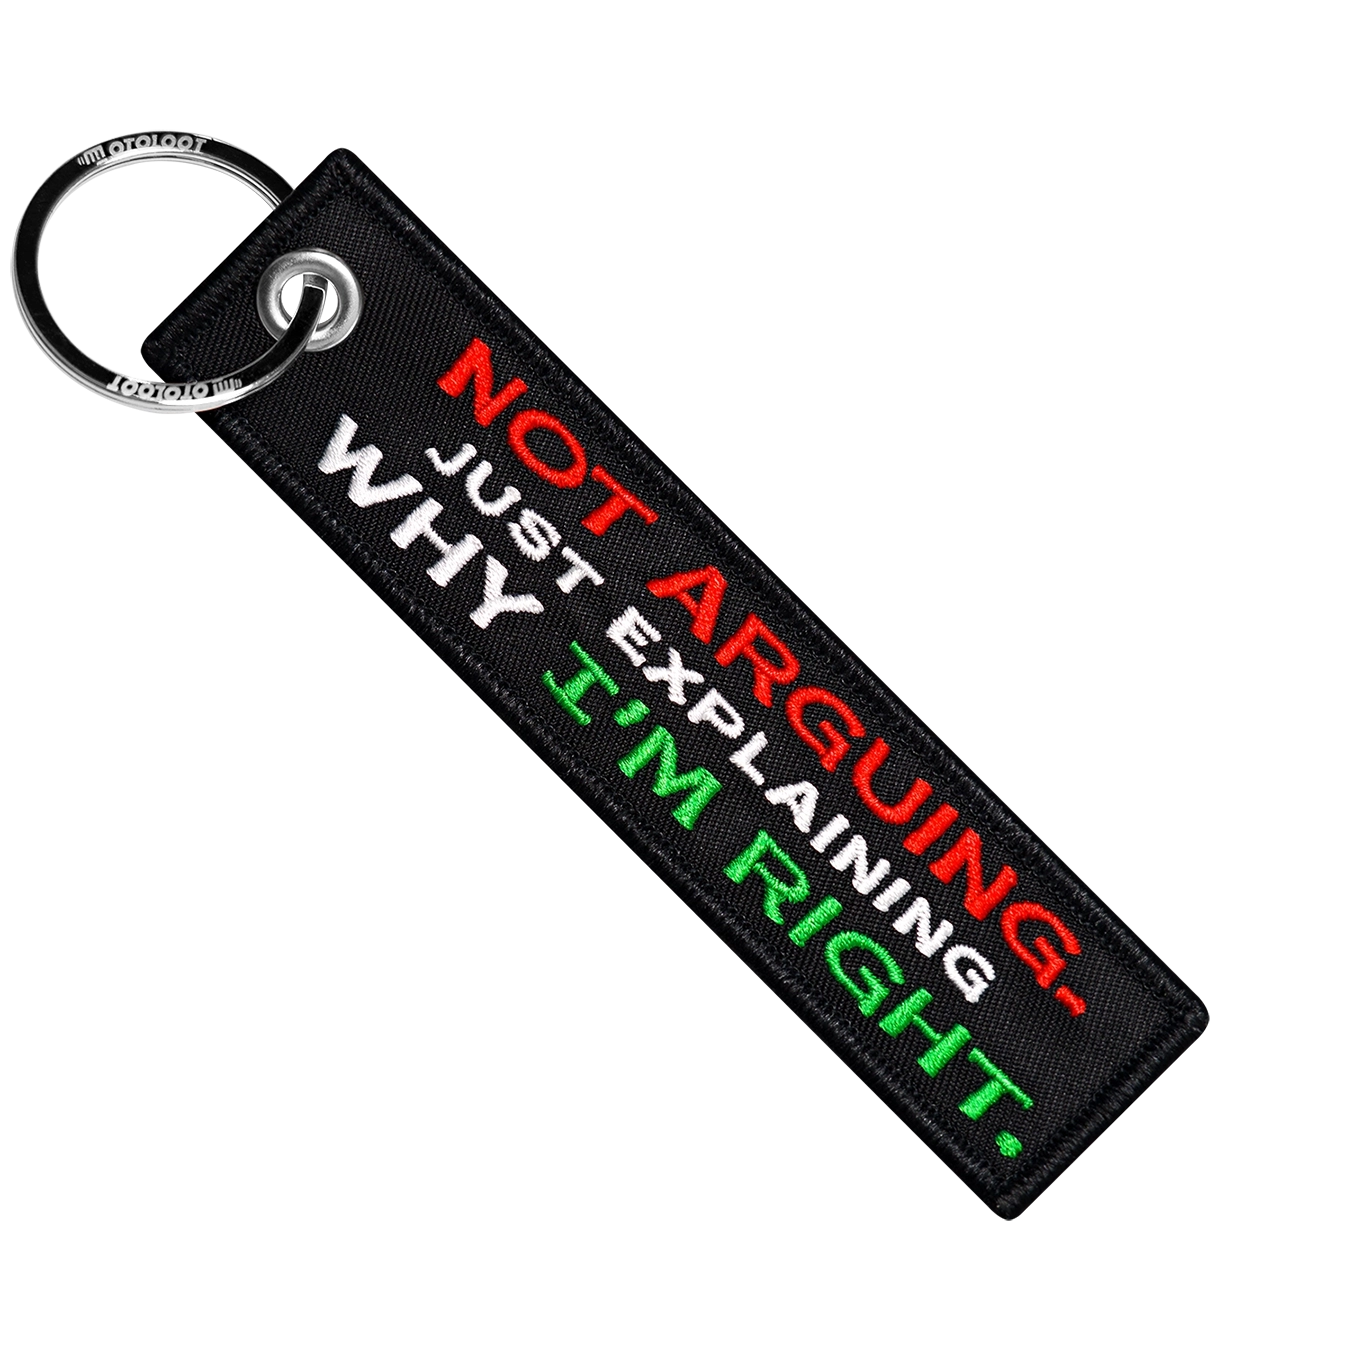 Not Arguing. Just Explaining Why I'm Right. - Motorcycle Keychain